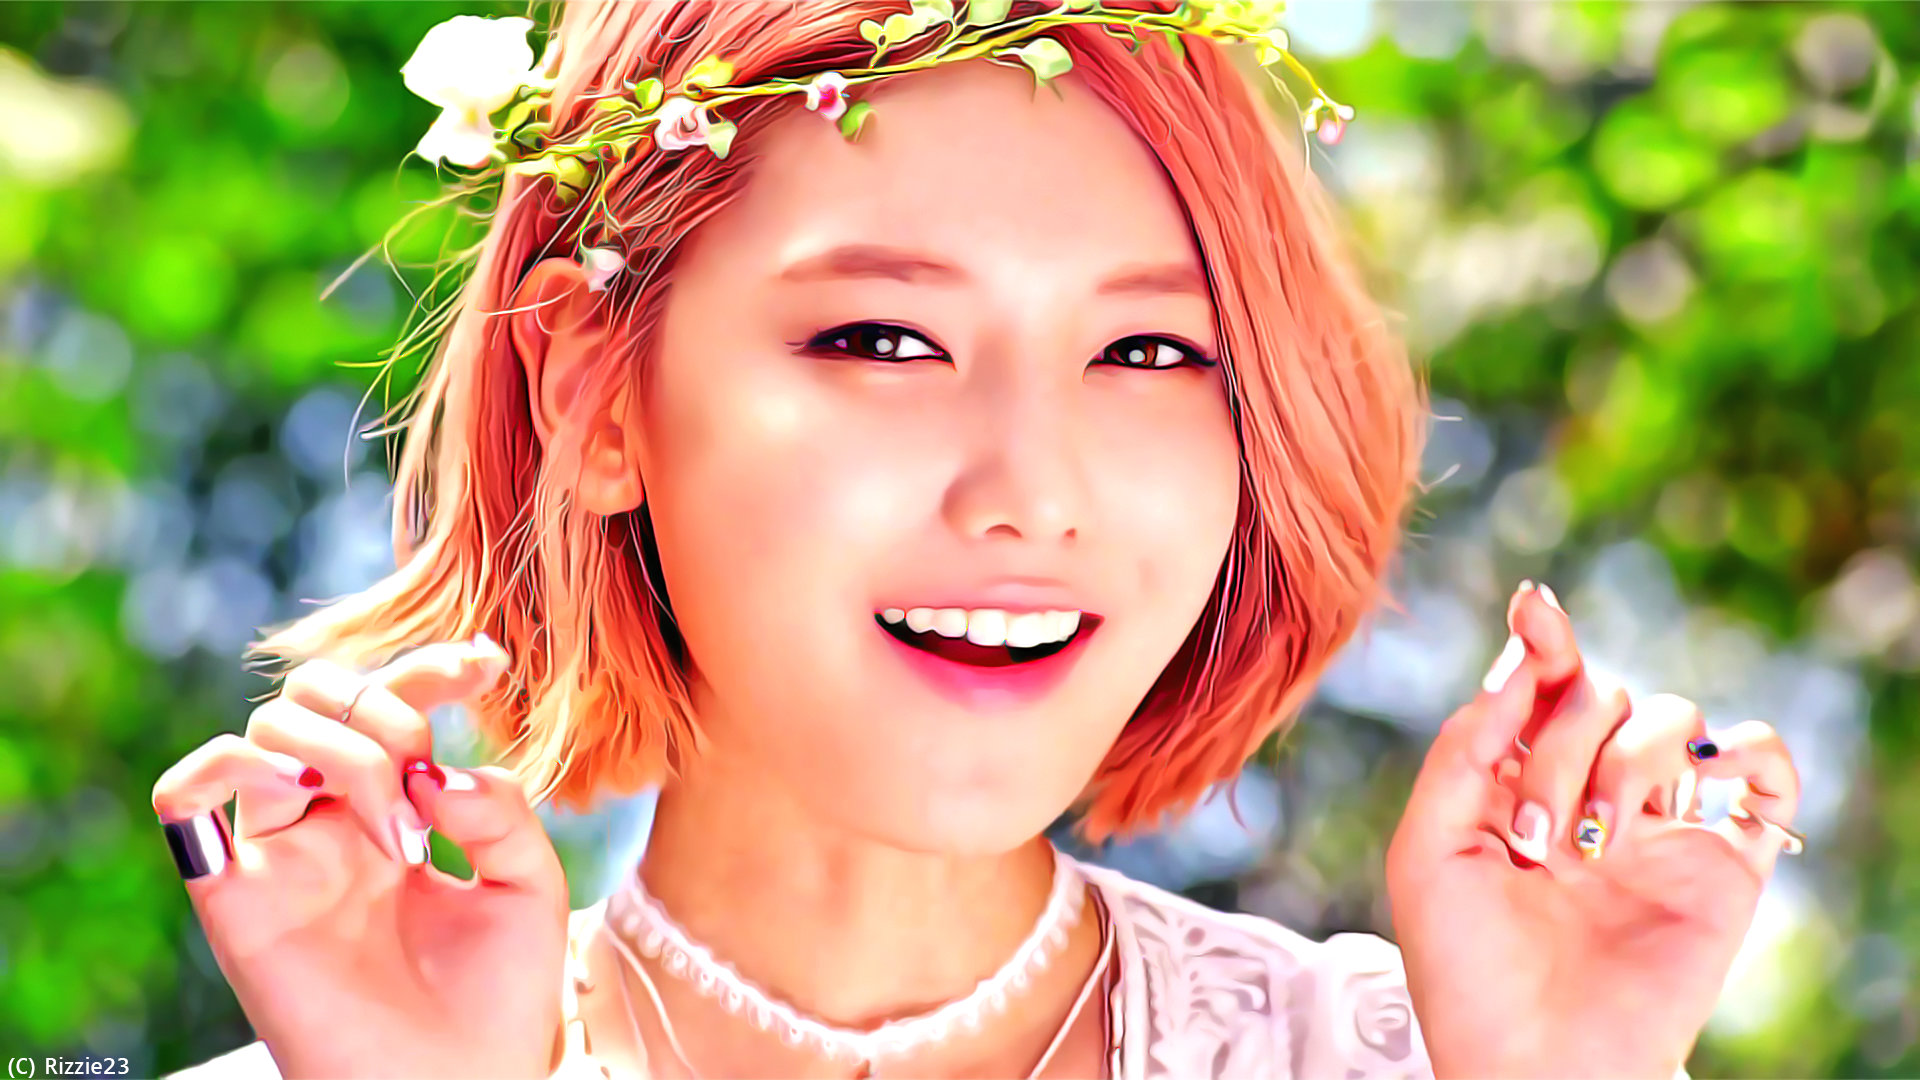 Sooyoung Party Wallpaper By Rizzie23